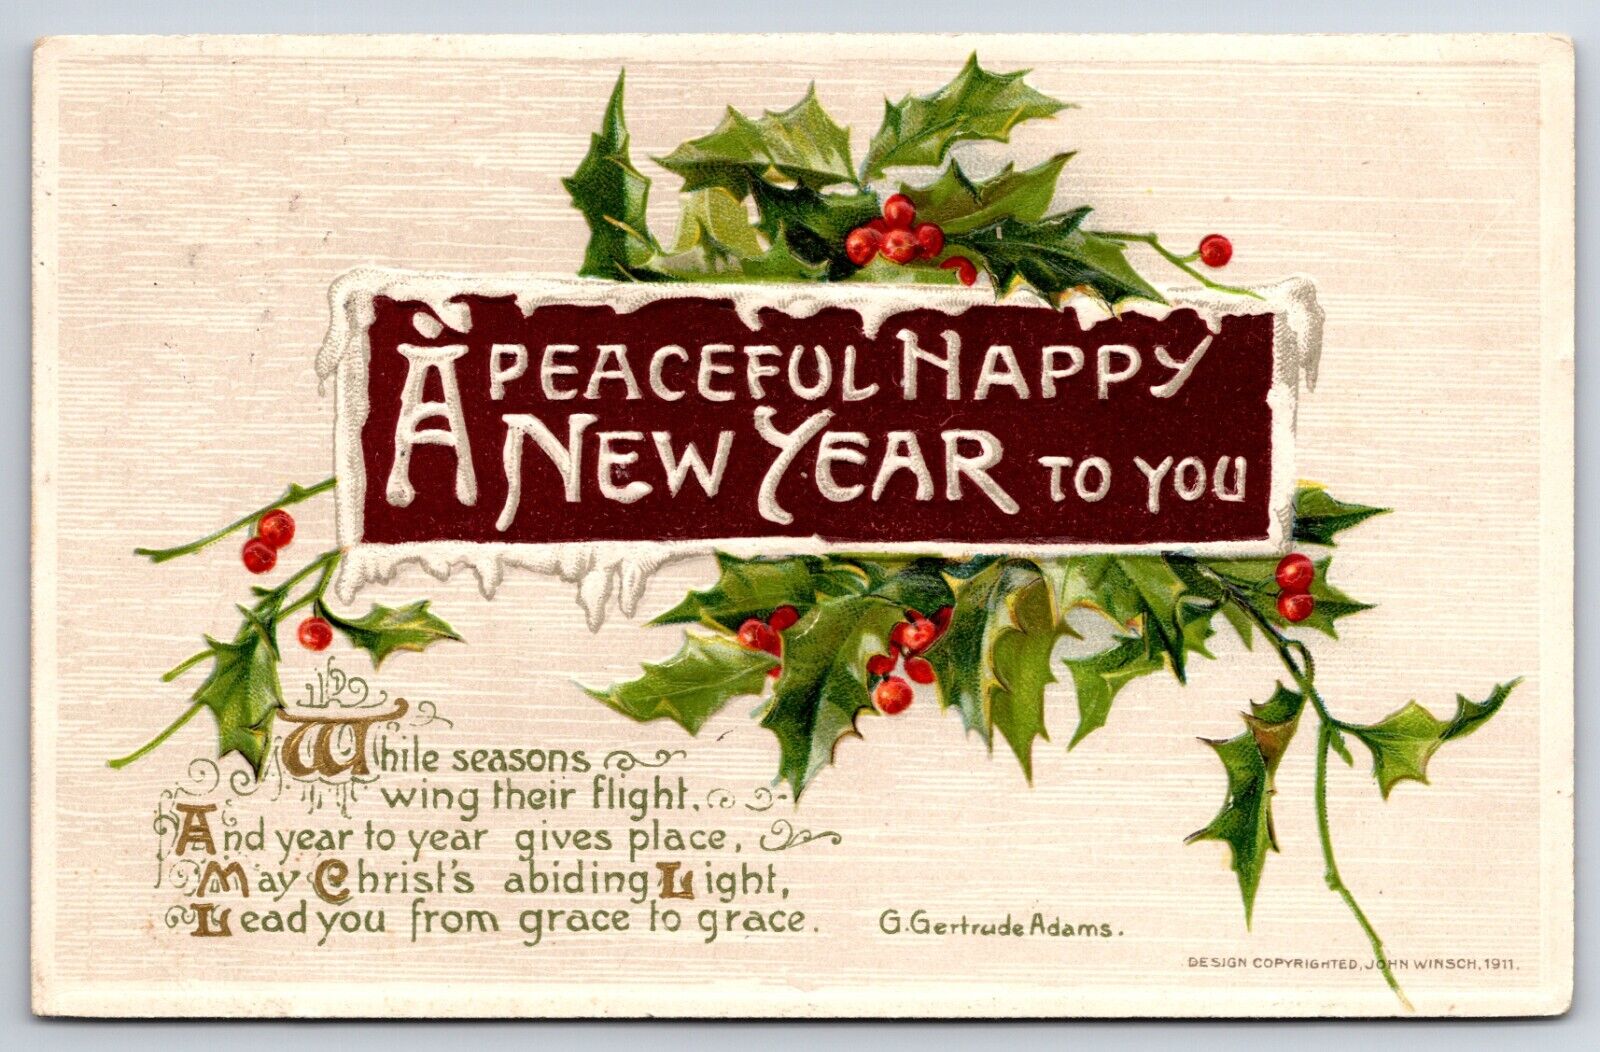 John Winsch c1911 Embossed A Peaceful Happy New Year To You Vintage Postcard